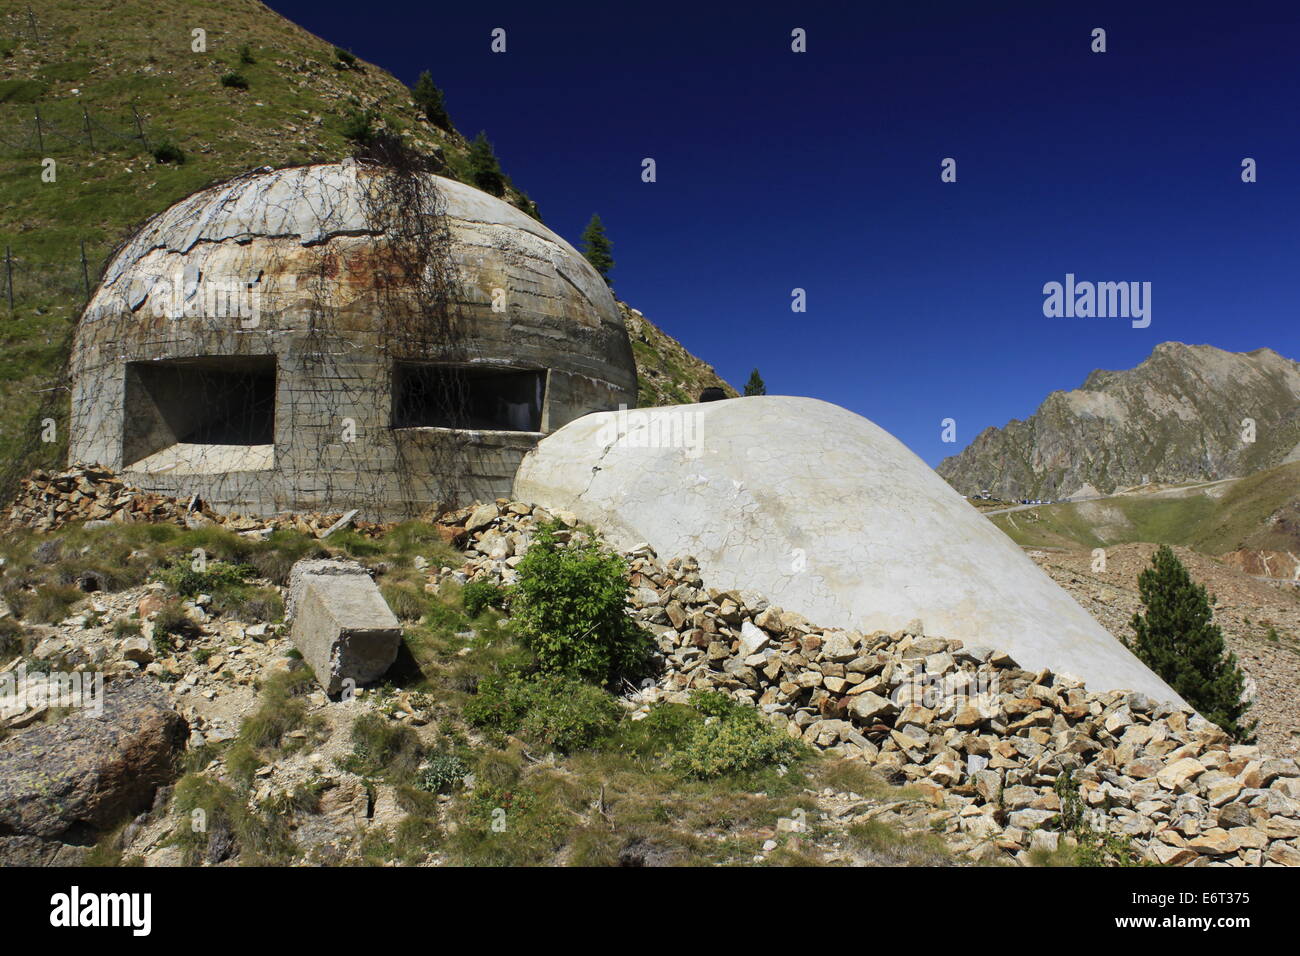 Col de la lombarde, bunker in the mountain, at the border between Cuneo, Piedmont, in Italy and the station of Isola 2000 Stock Photo